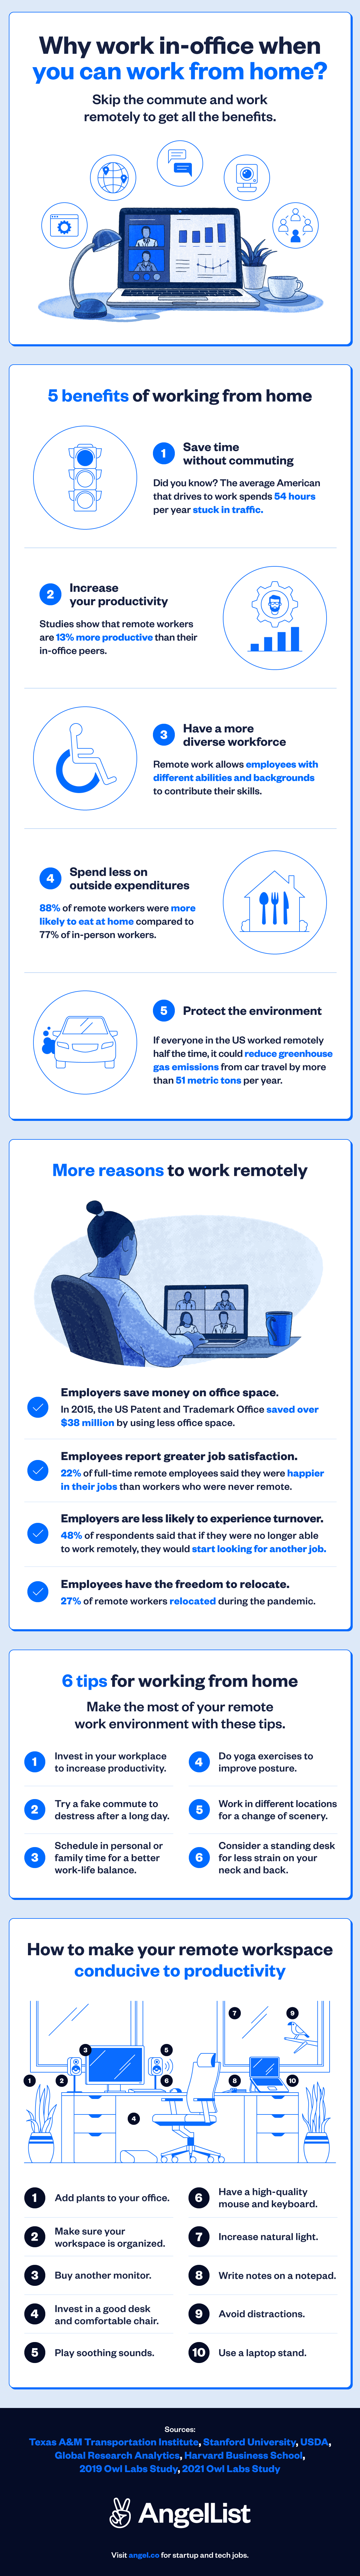 10 Huge Benefits of Working From Home